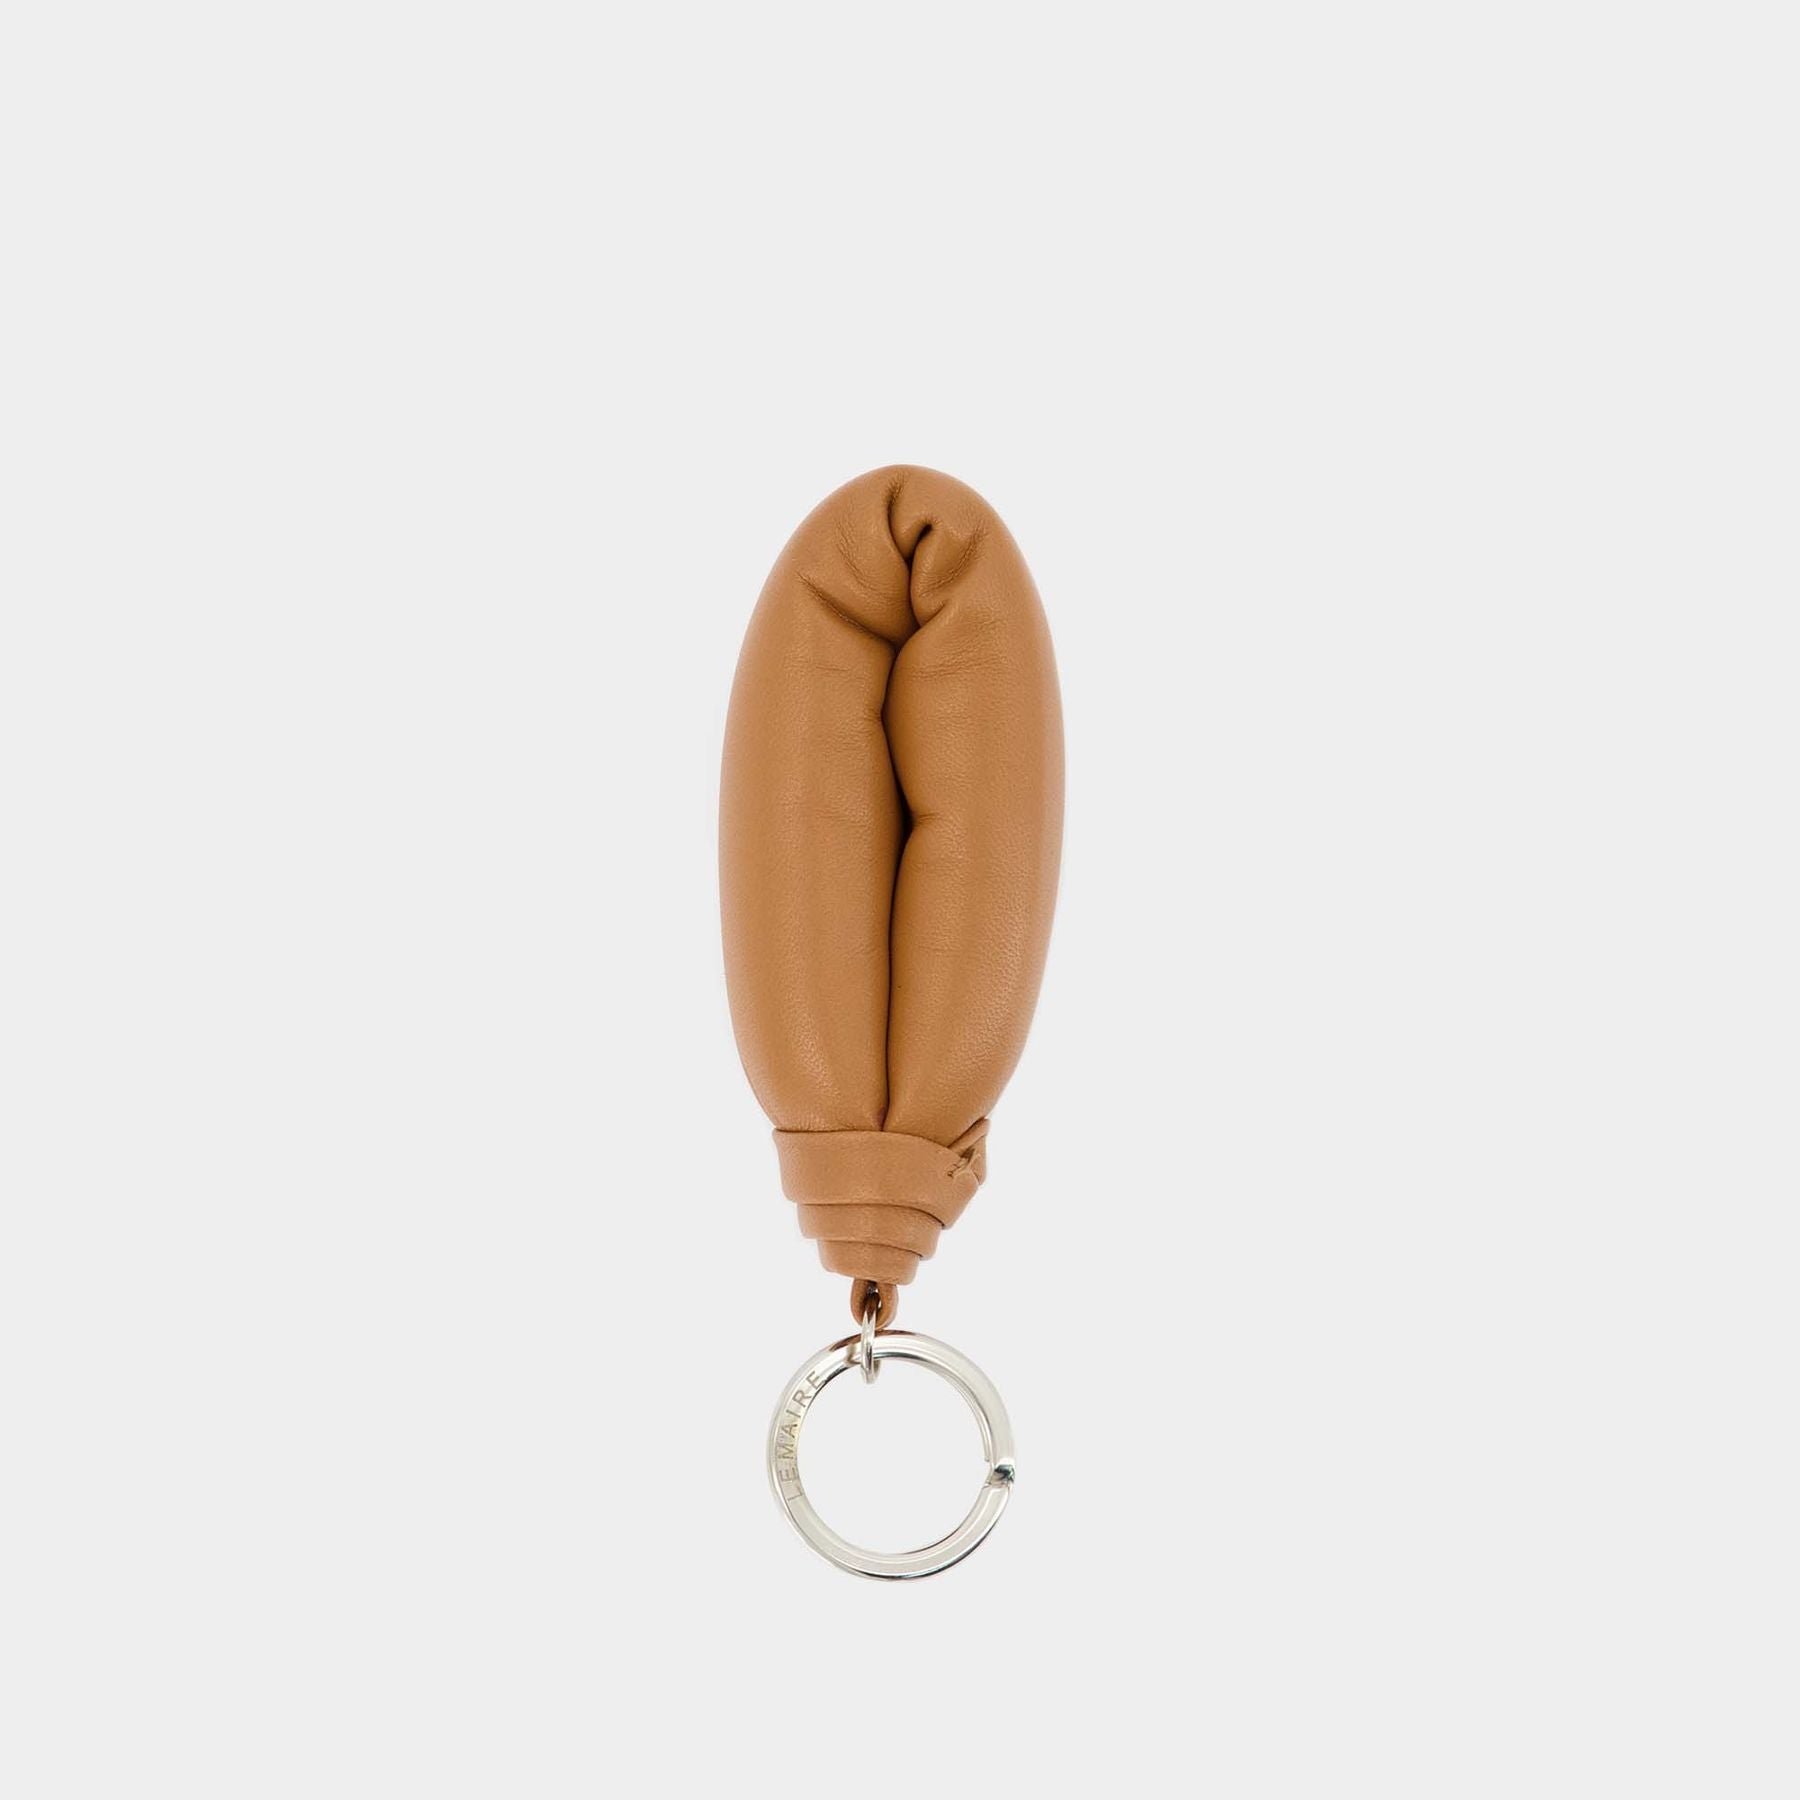 Lemaire Brown Enveloppe Keychain